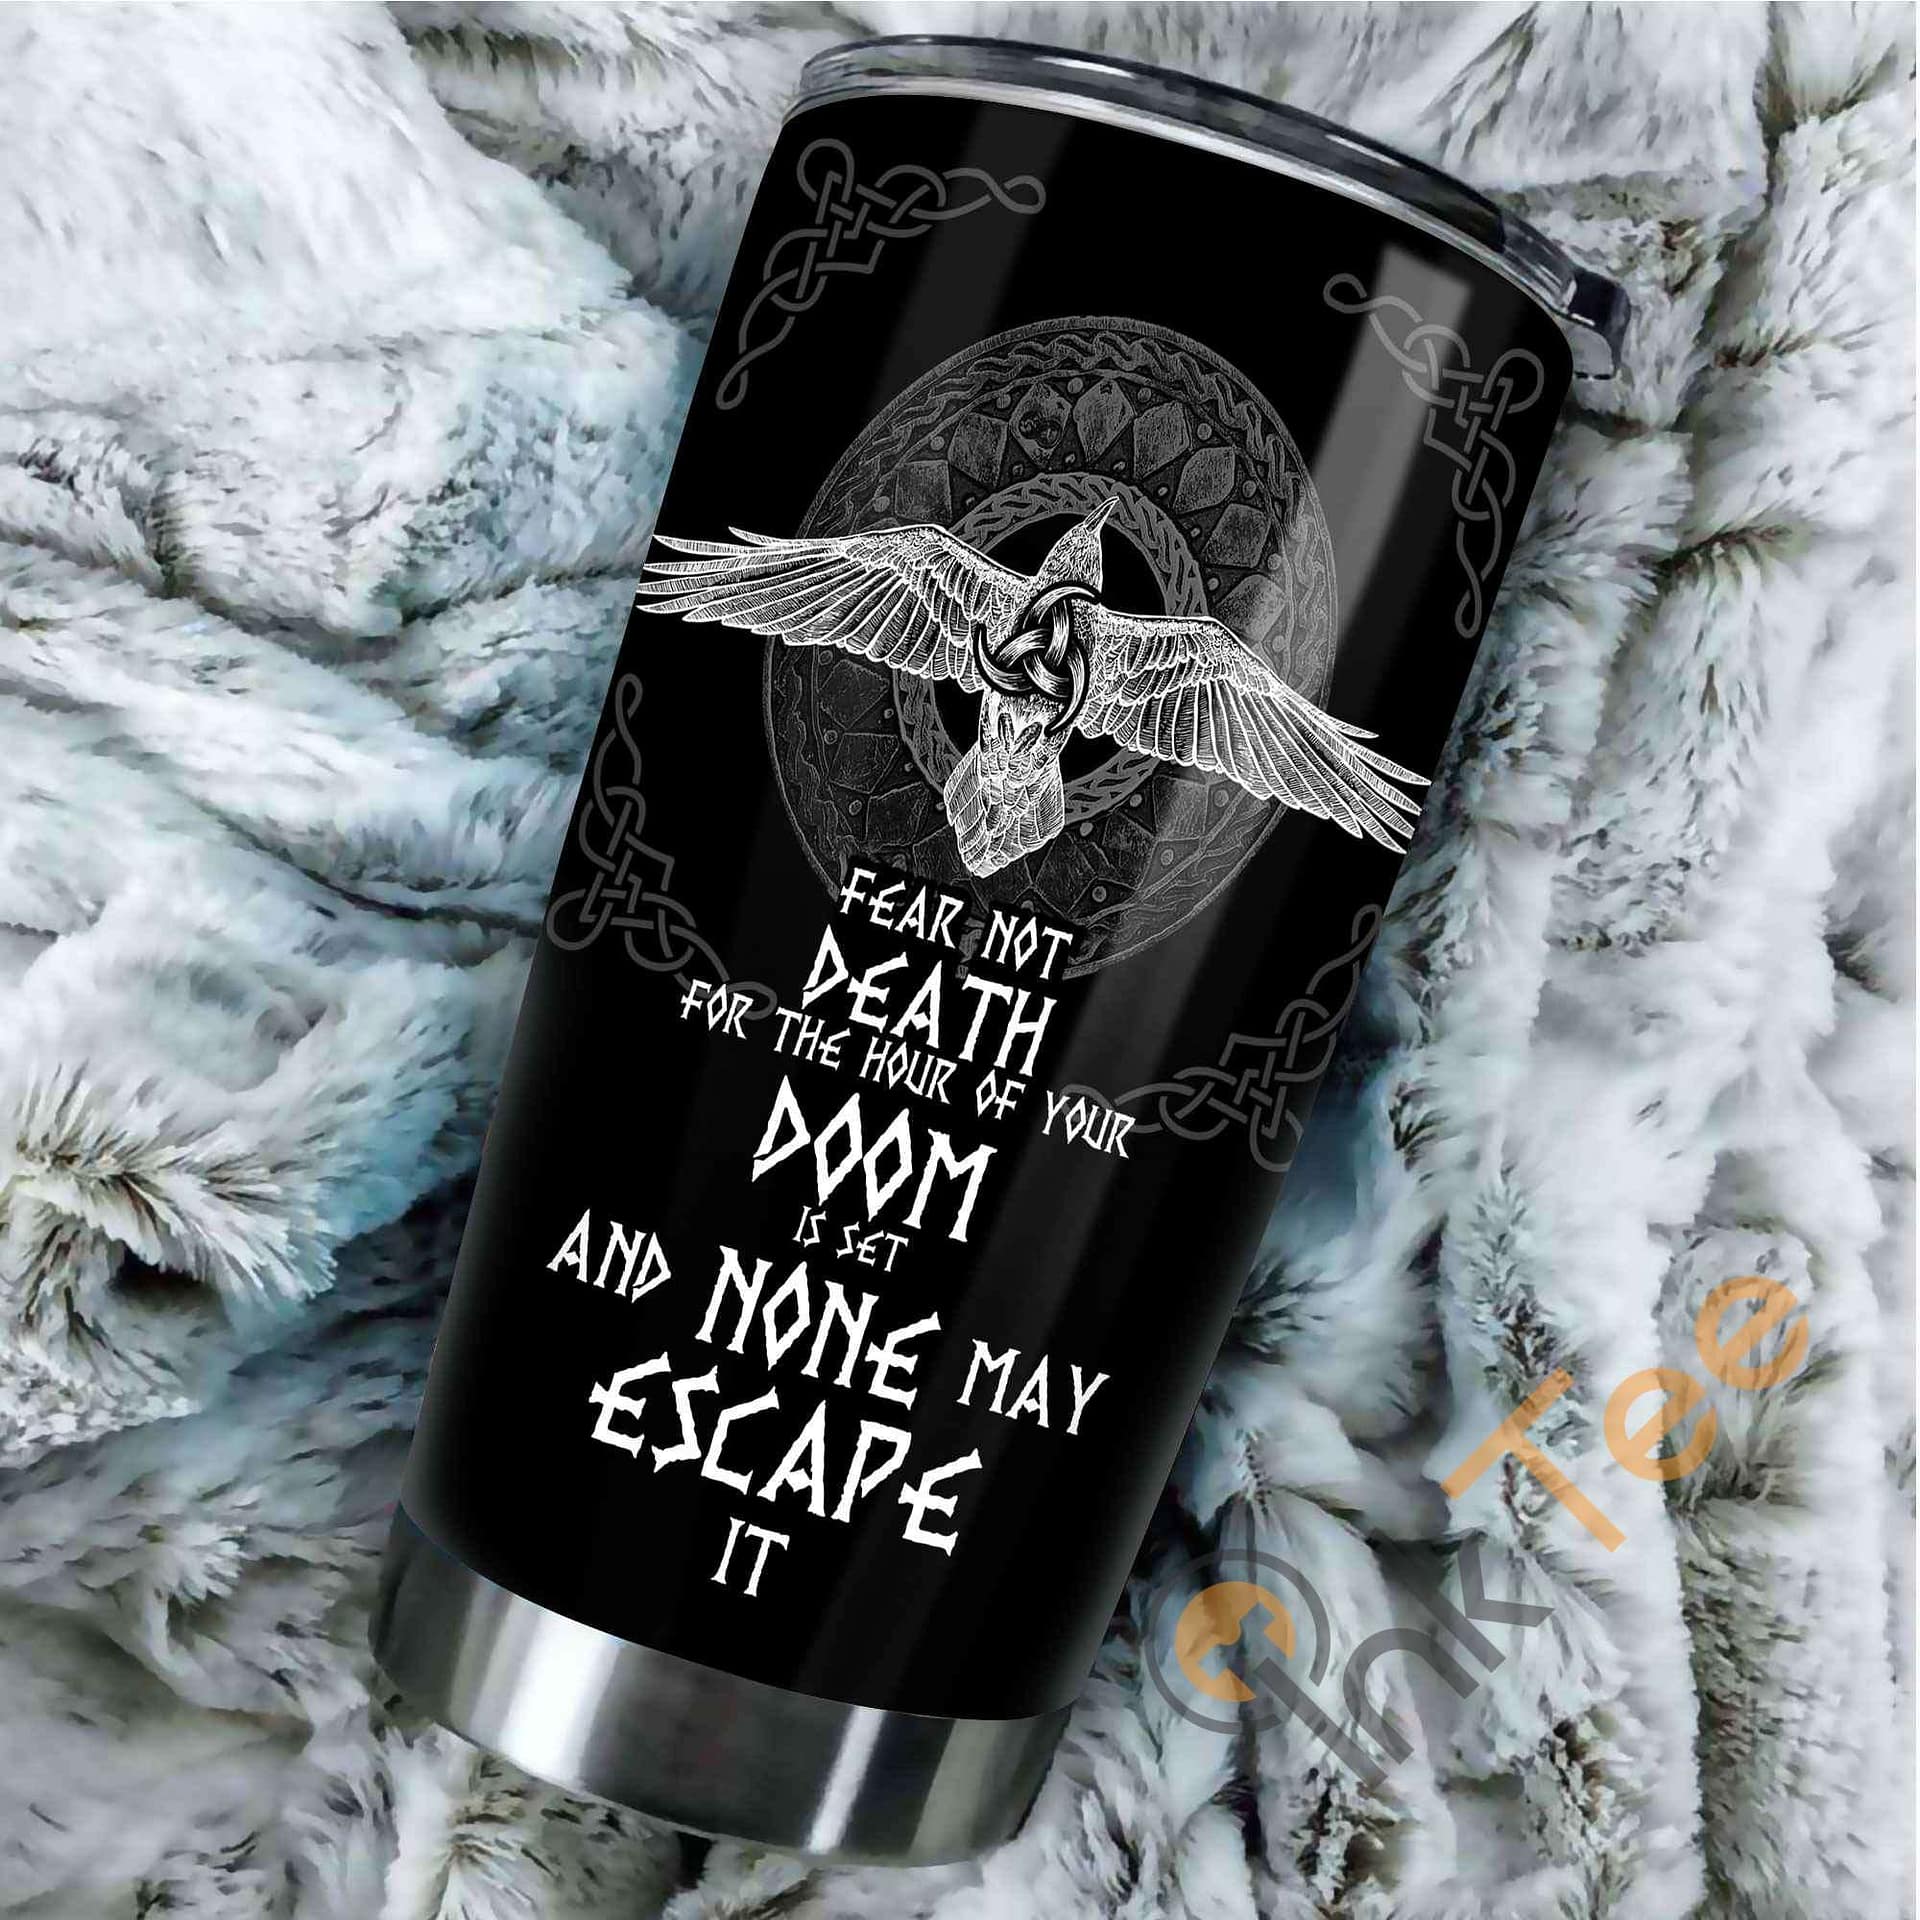 Fear Not Death For The Hour Of Your Doom Amazon Best Seller Sku 3307 Stainless Steel Tumbler